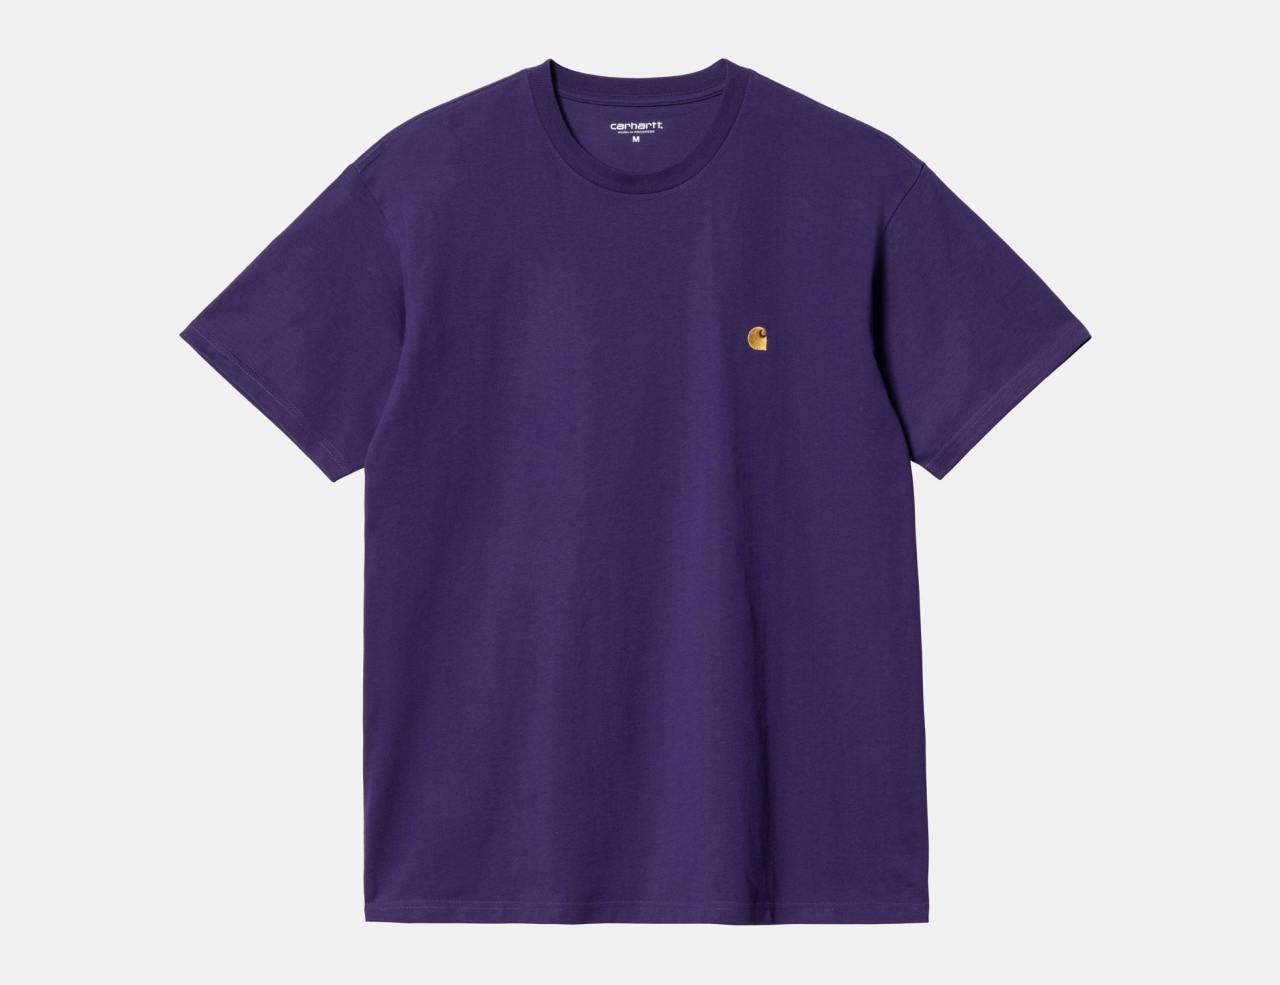 Carhartt WIP S/S Chase T-Shirt - Tyrian/Gold